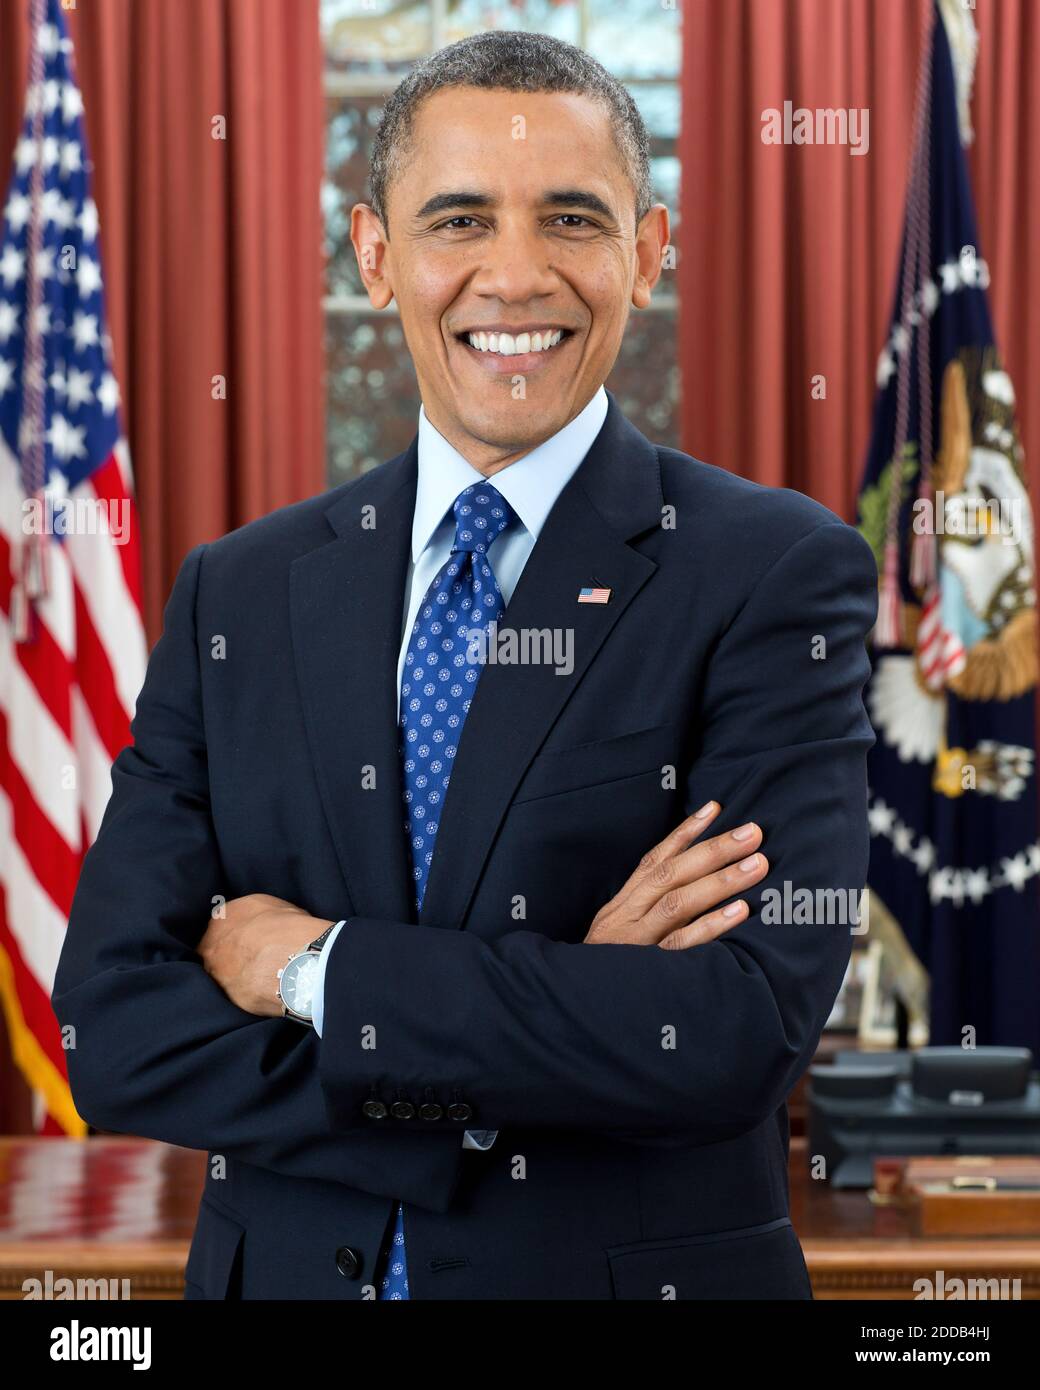 BARACK OBAMA  during a presidential portrait sitting for an official photo in the Oval Office, 6 De ember 2012.  Official White House Photo by Pete Souza Stock Photo